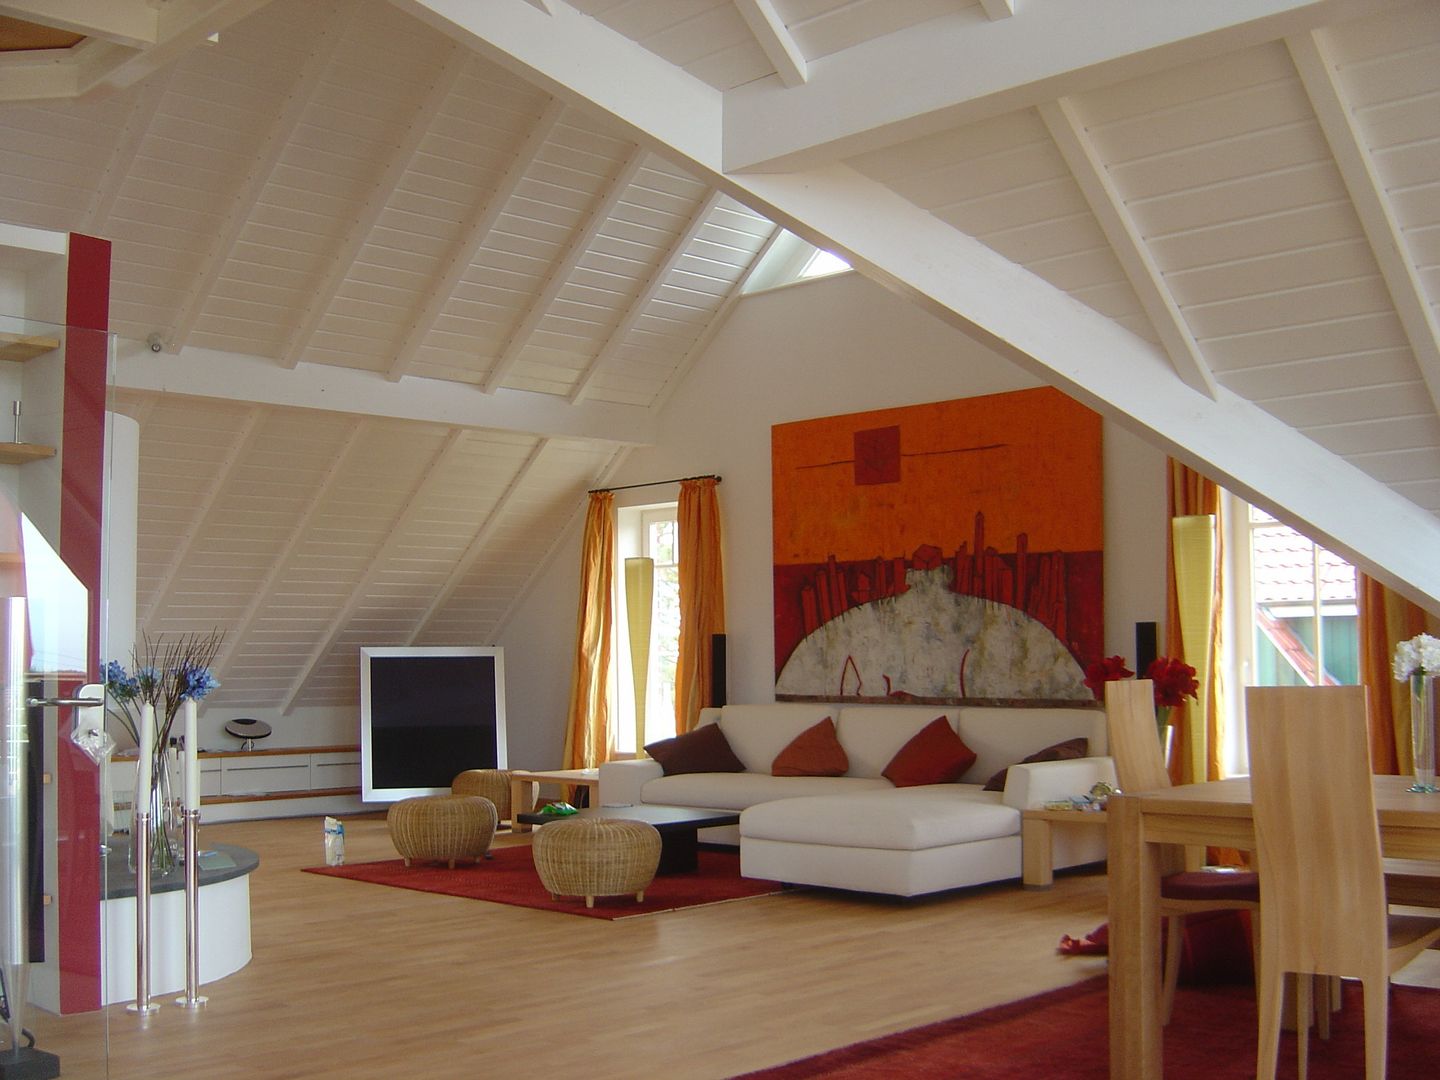 Ferienhaus Nordsee, made by S / creativport hamburg made by S / creativport hamburg Living room